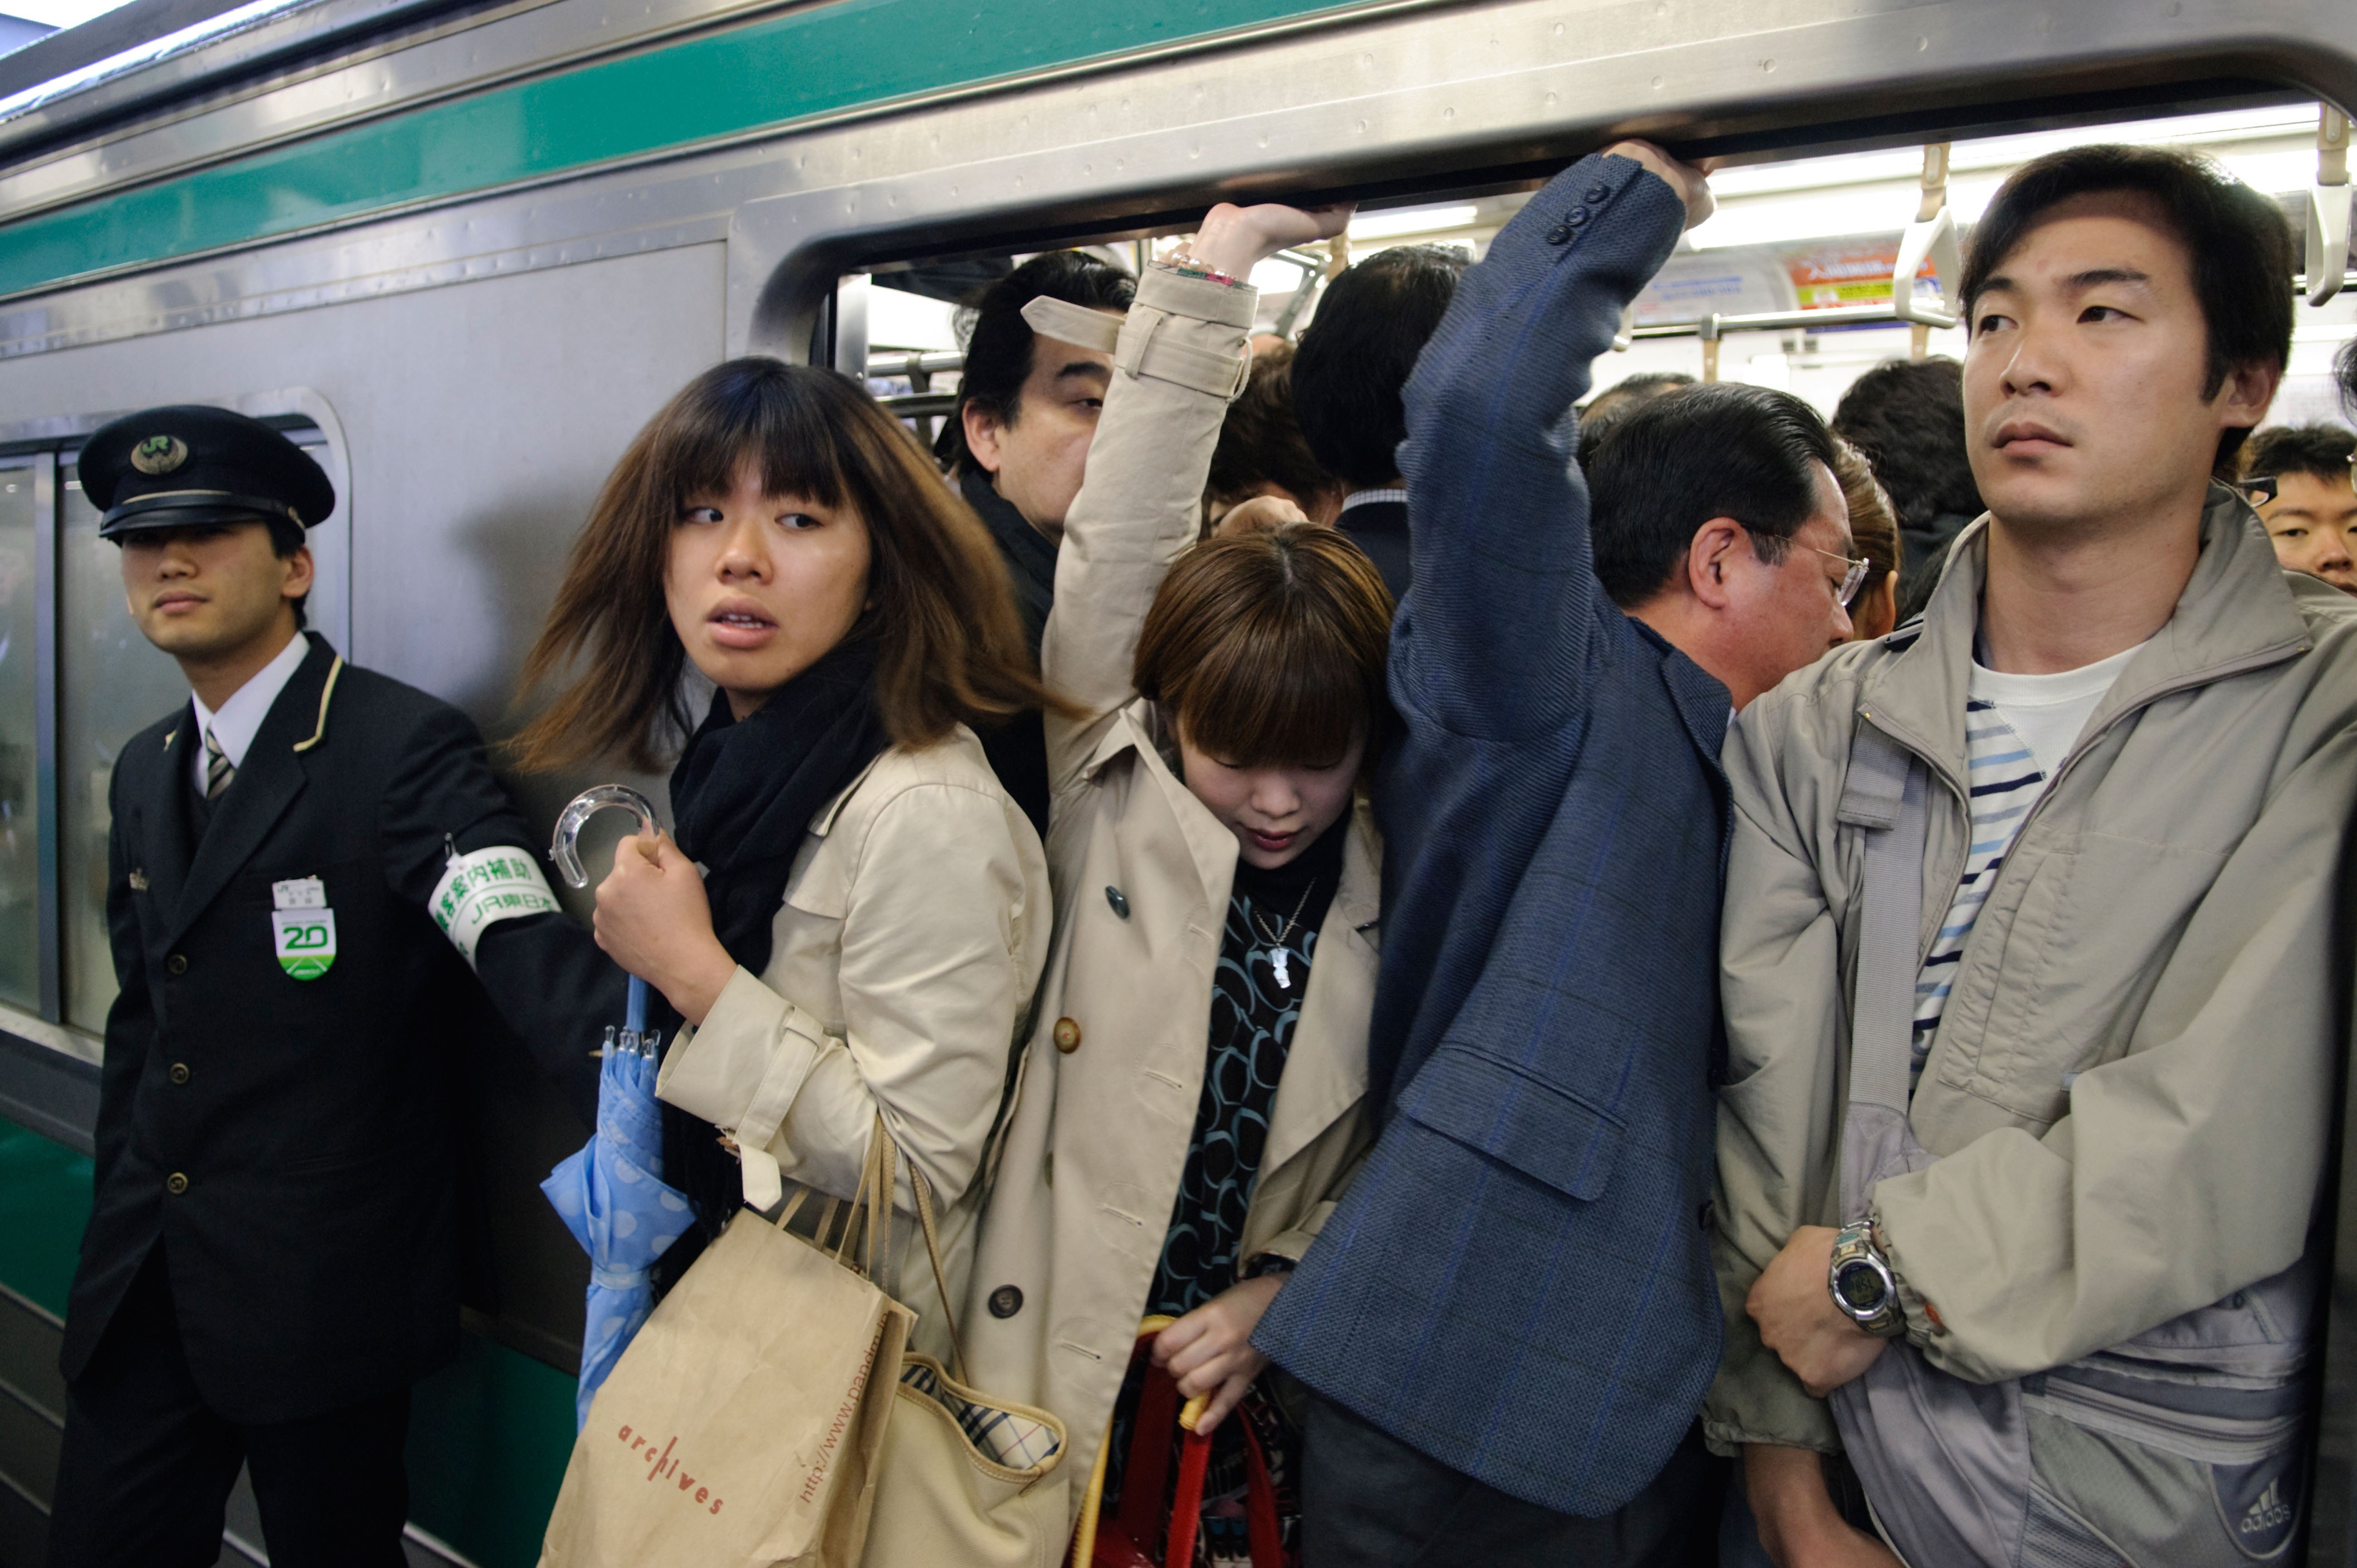 Reluctant Asian Train Porn - Six ways Japanese women can deter gropers on trains and ...